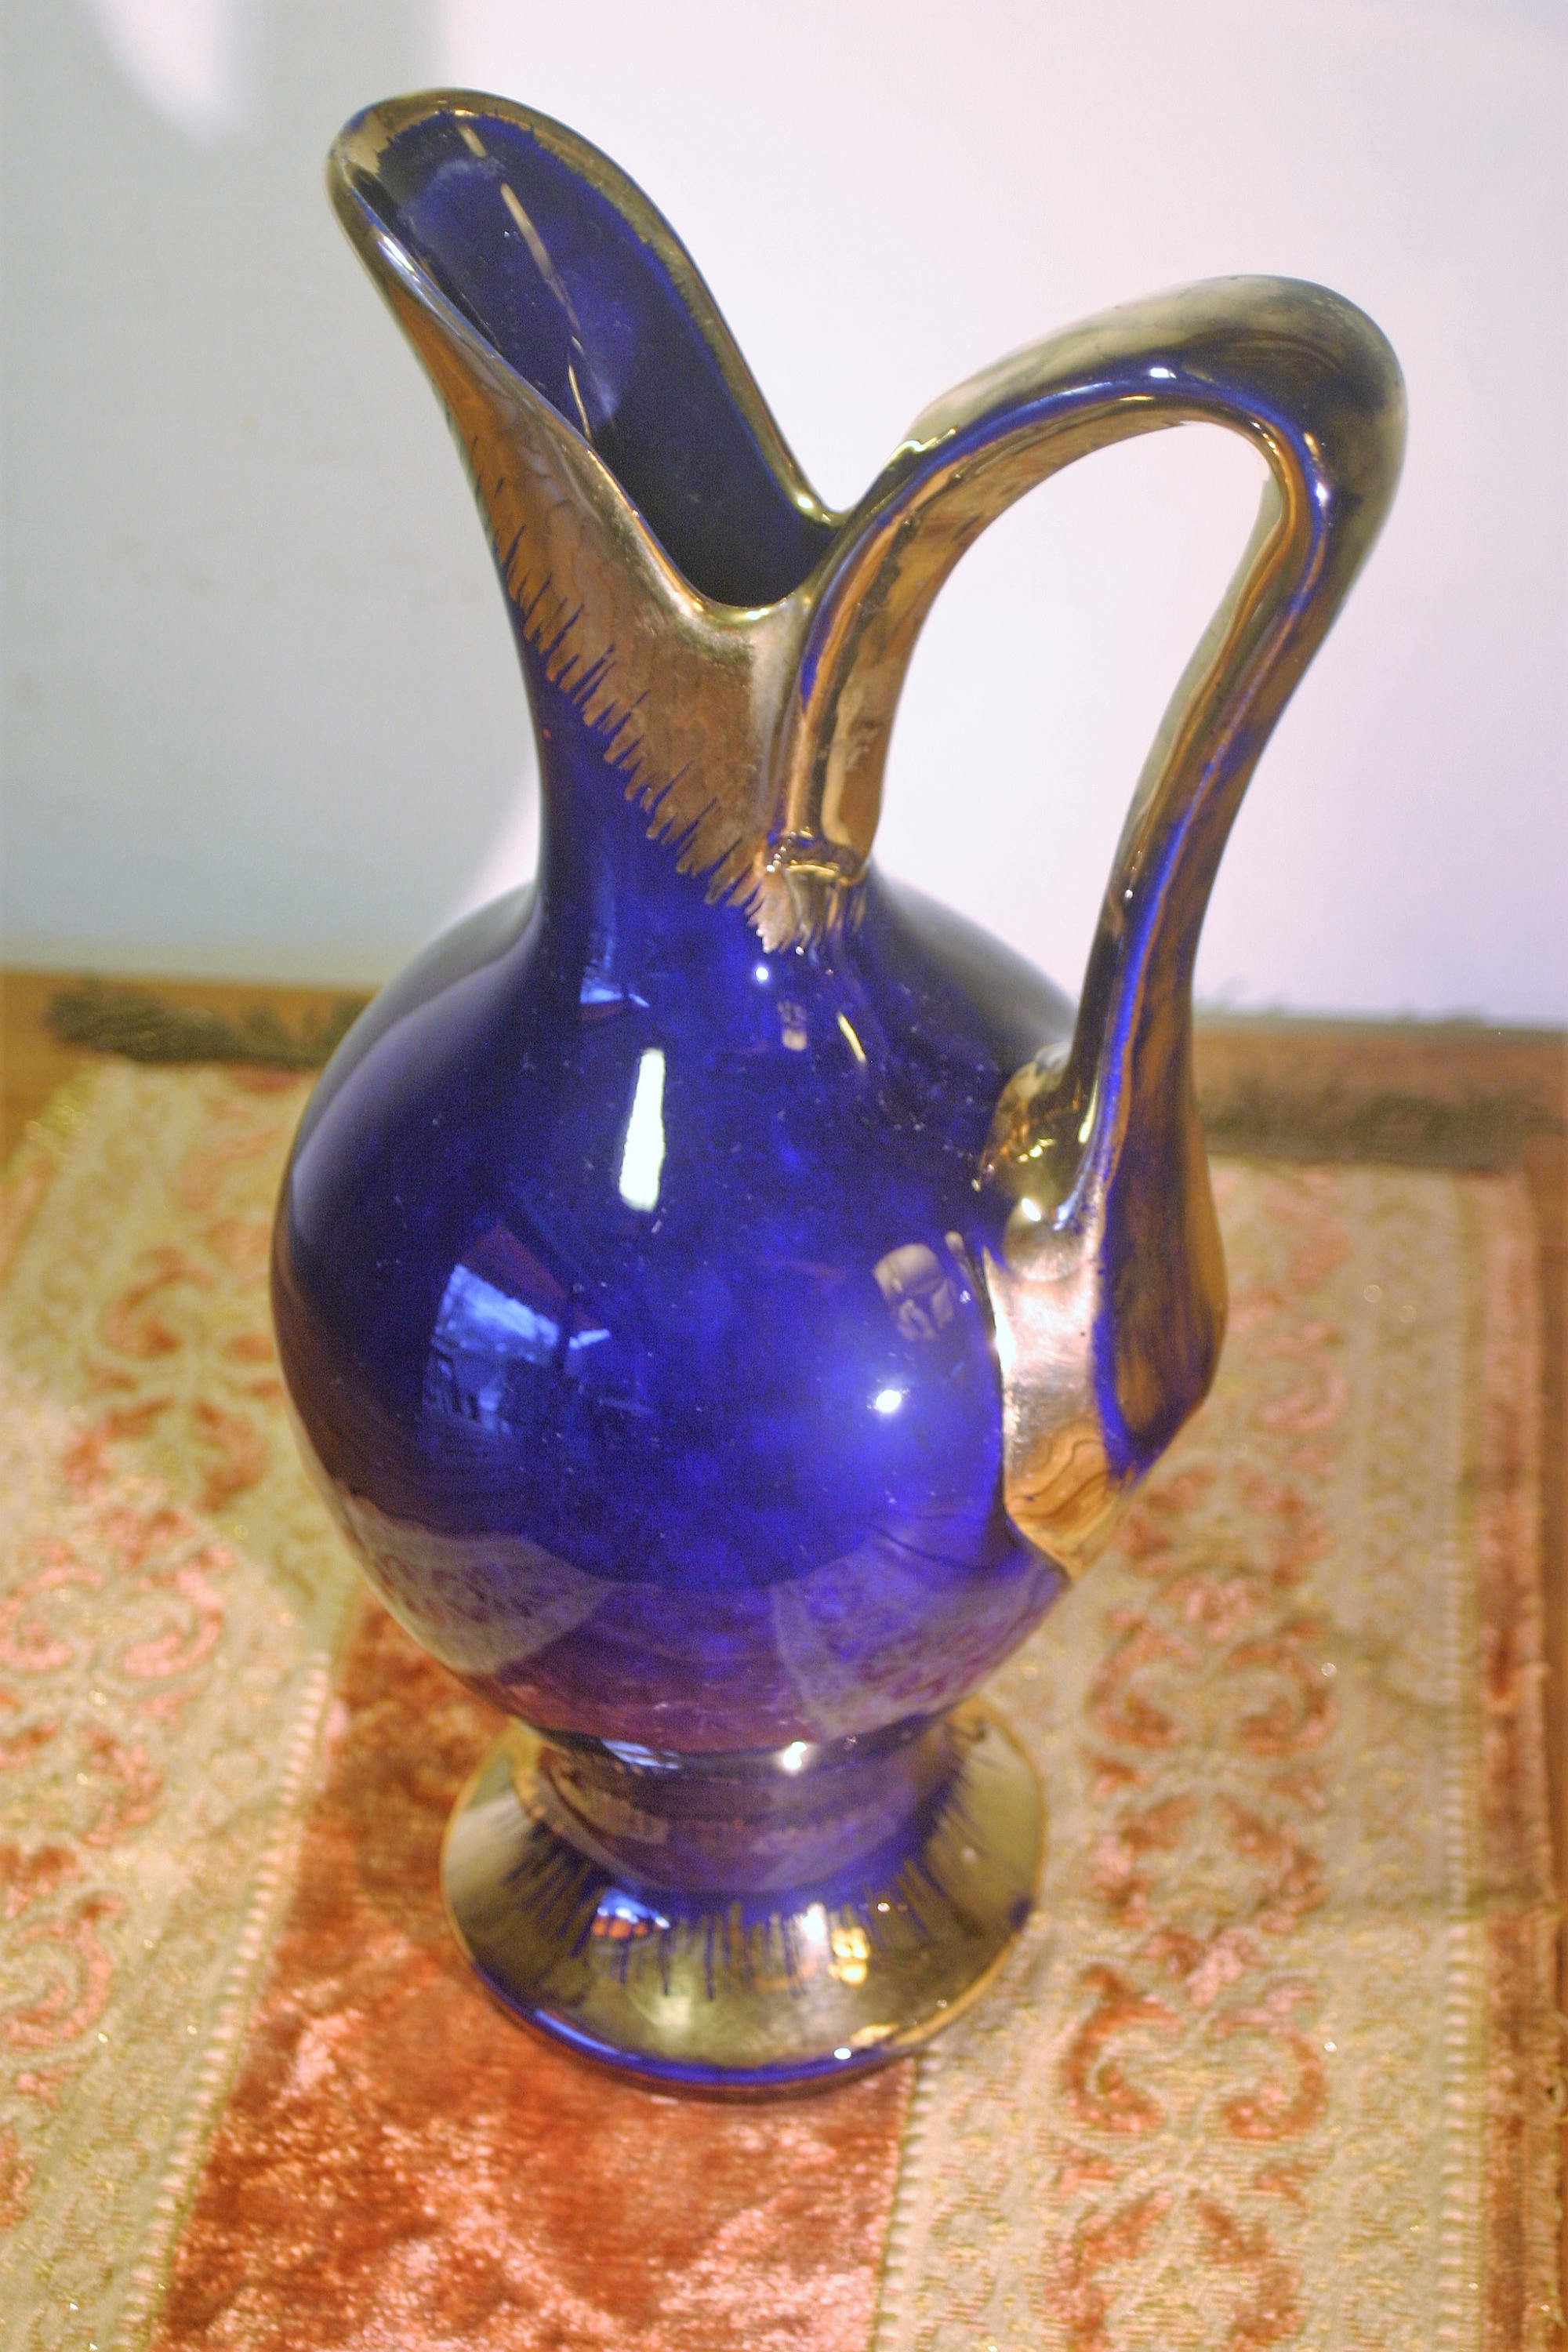 24 attractive Satsuma Vase with Handles 2023 free download satsuma vase with handles of vase unmarked continental cobalt blue one handle etsy with dc29fc294c28ezoom